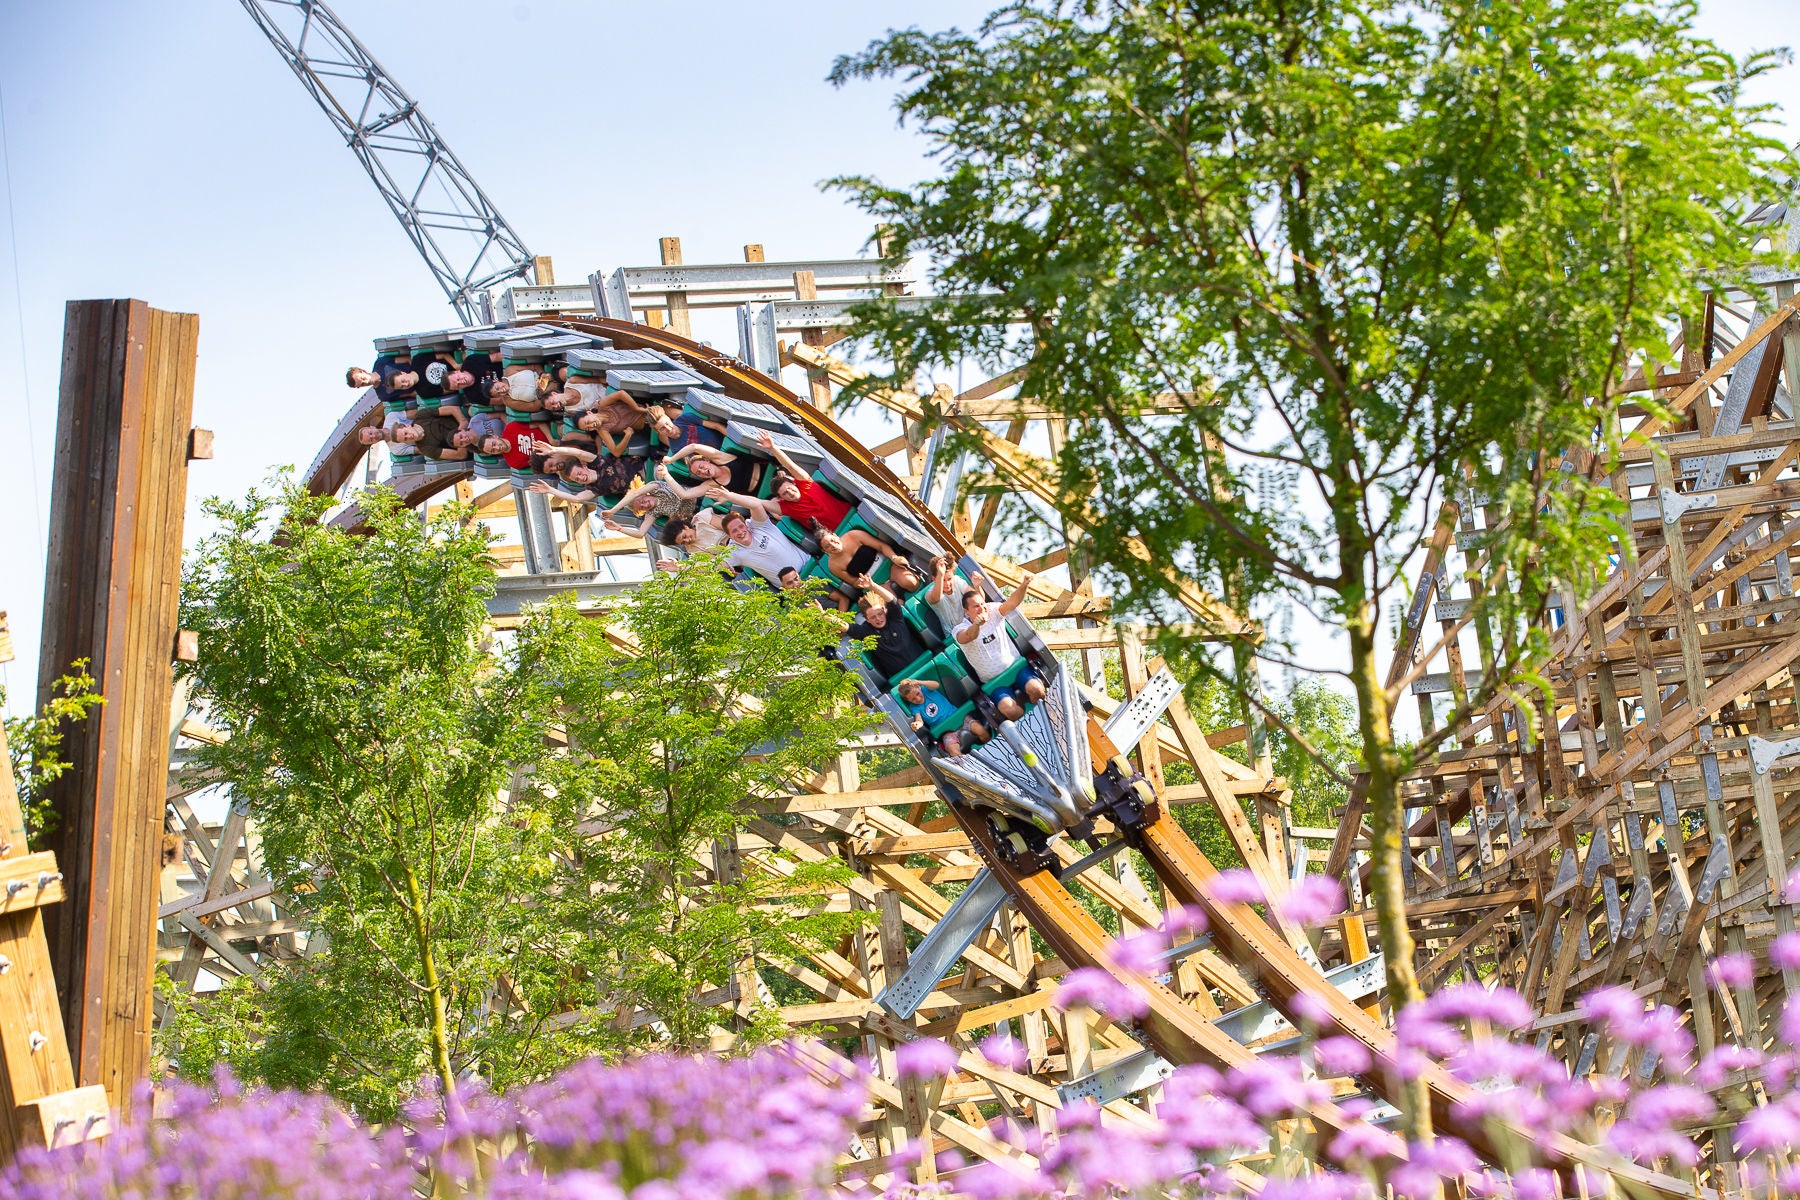 UNTAMED's train races down the track.